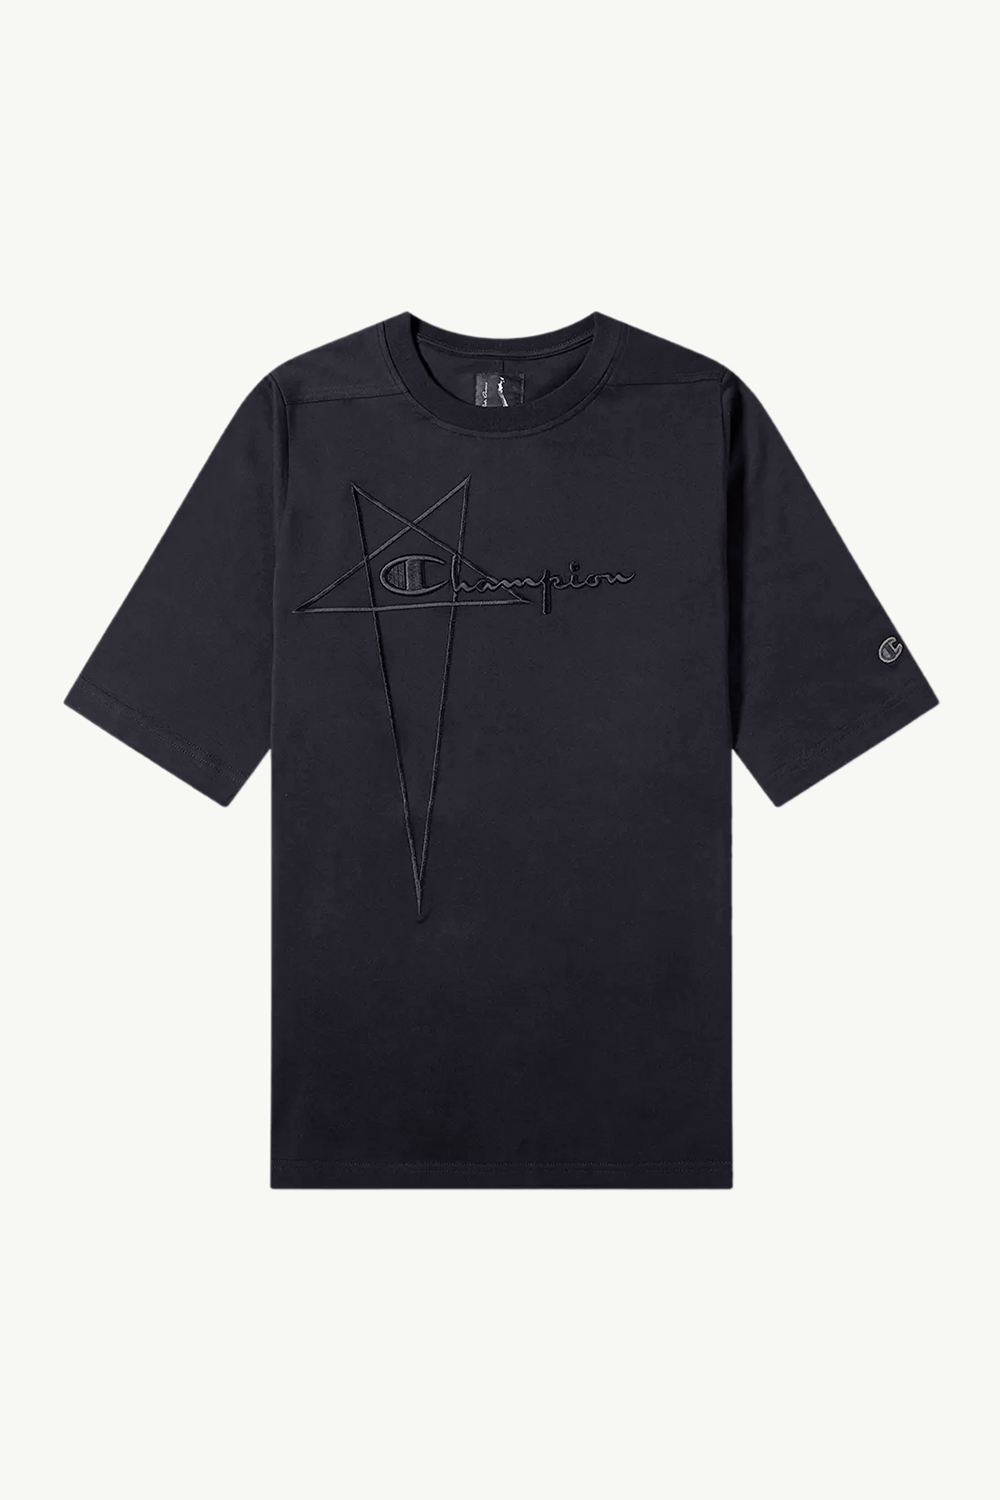 RICK OWENS x CHAMPION Men Embroidered Logo Oversized T-Shirt in Black 0